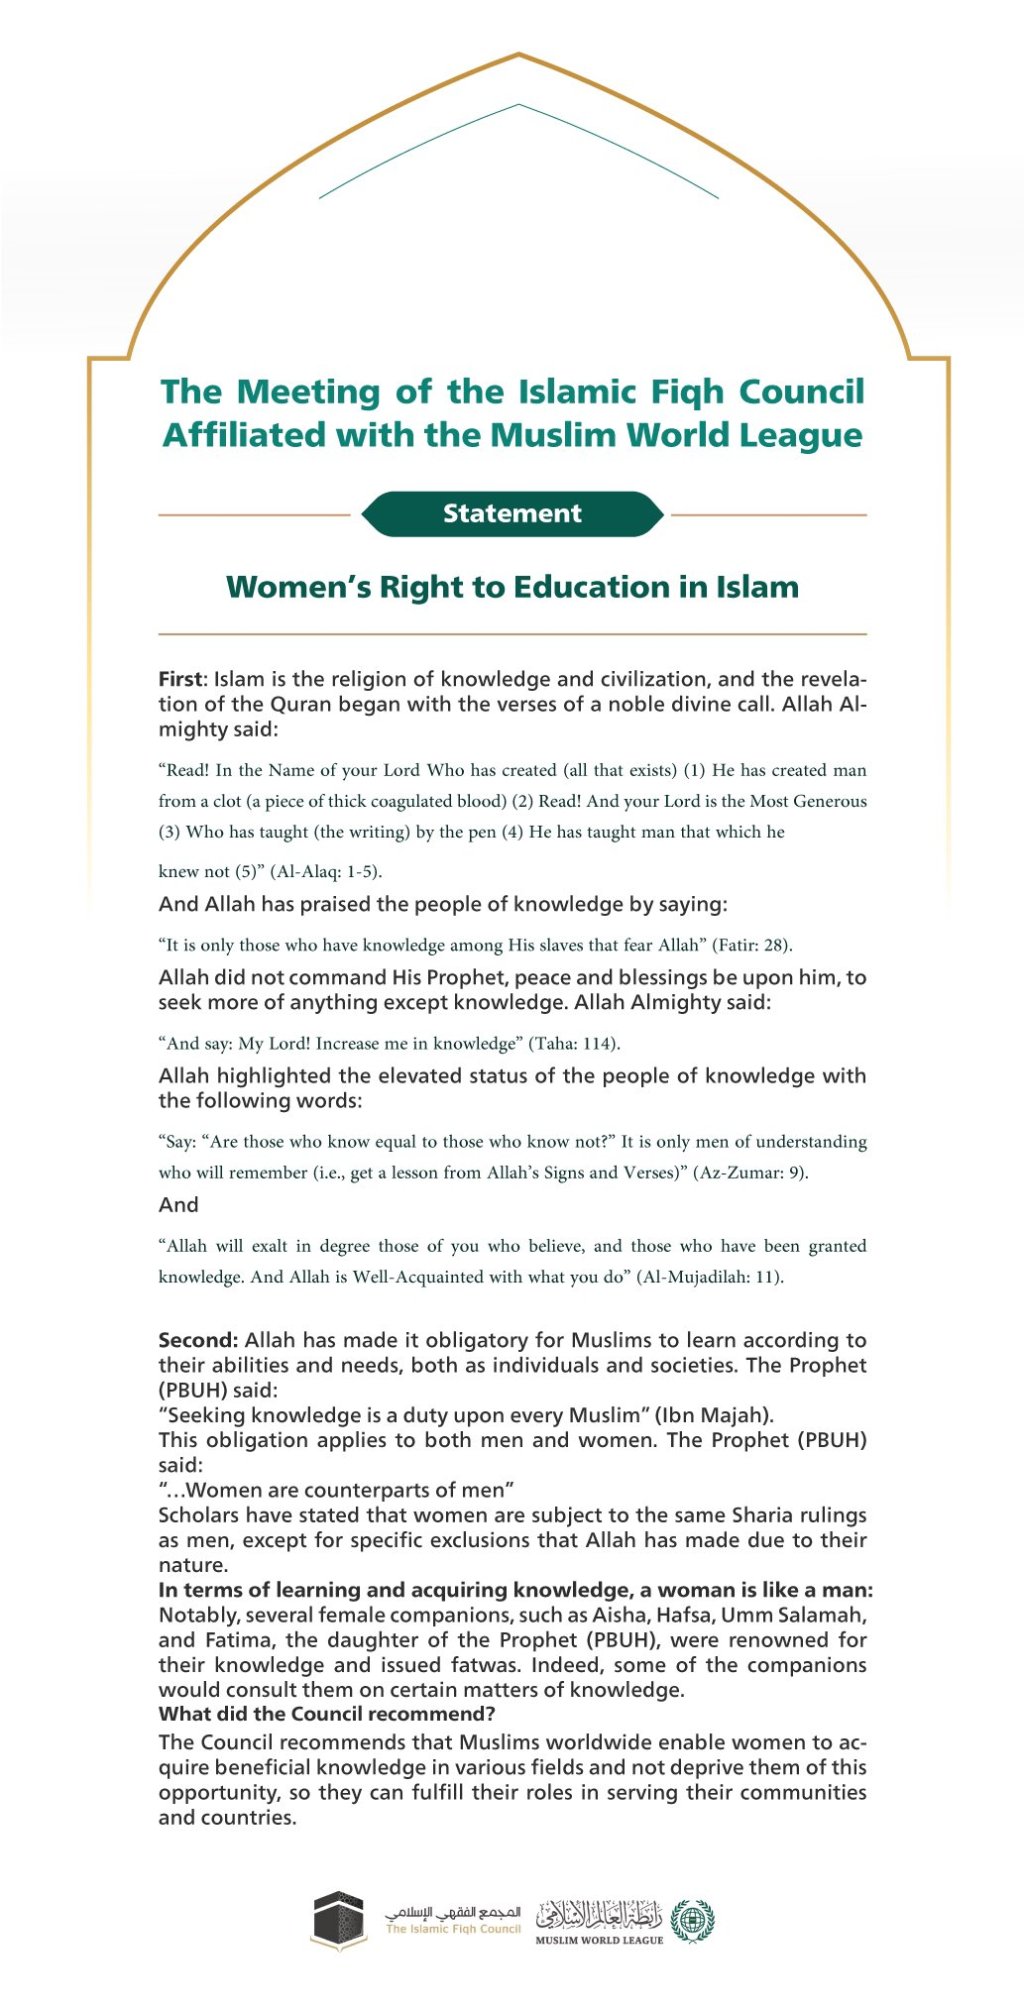 Women's Right to Education in Islam